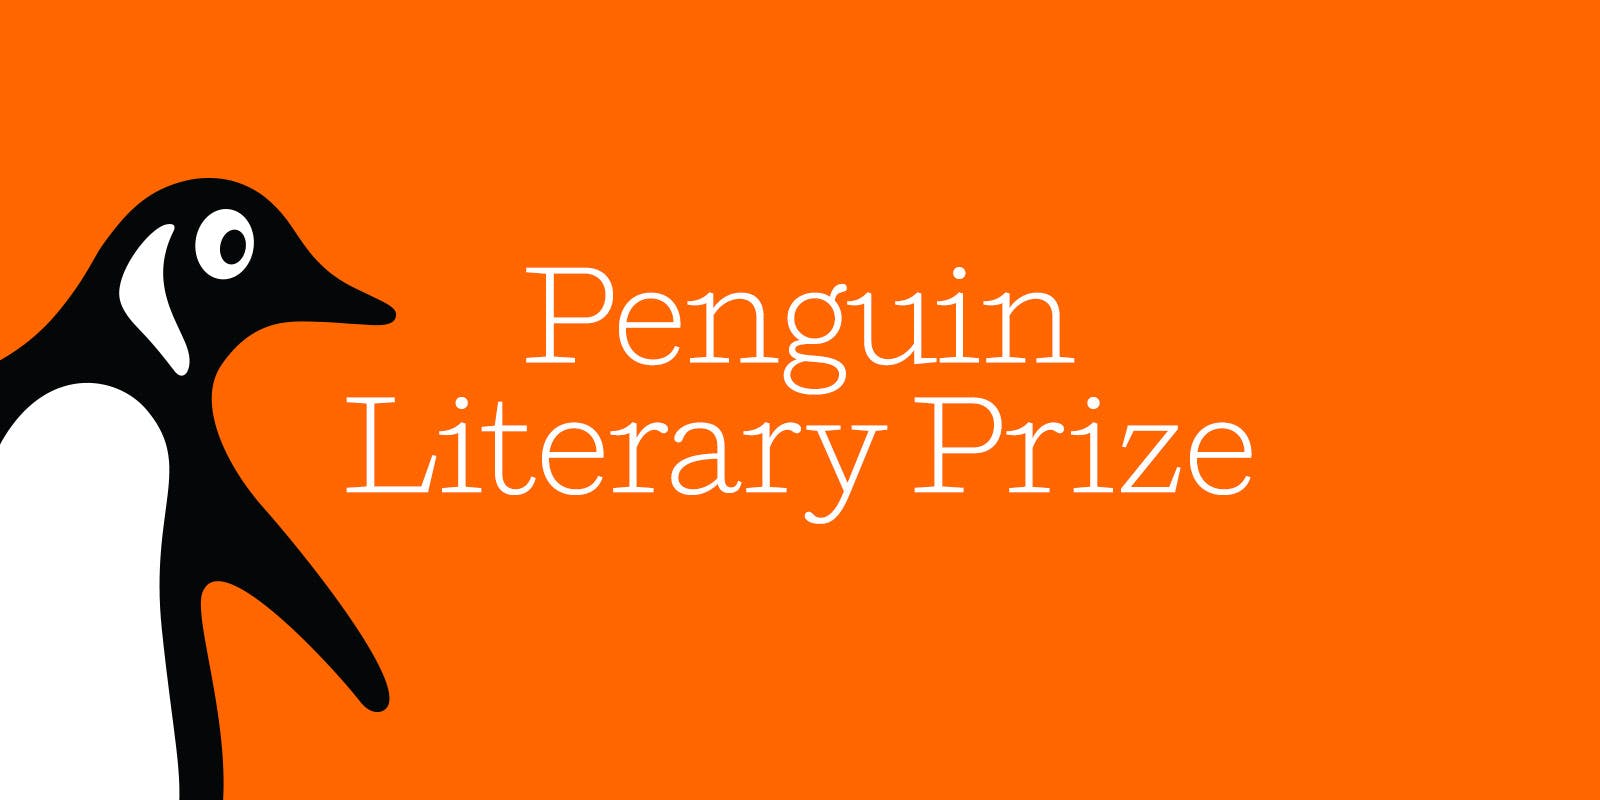 Penguin Literary Prize to open for submissions in September